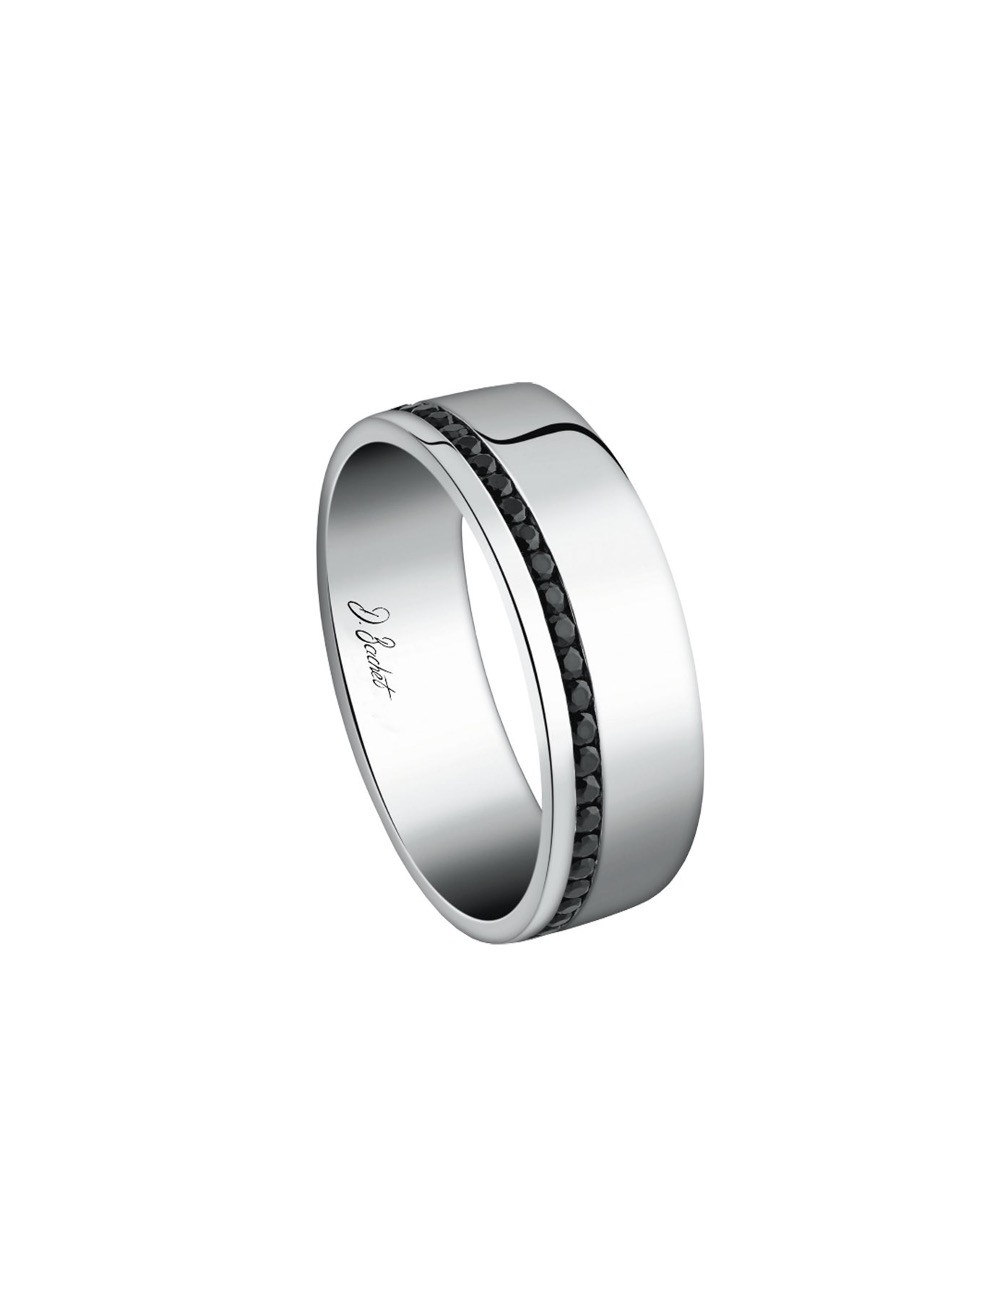 Men's wedding band with a bold and sleek design, 7 mm wide, featuring polished platinum and black diamonds.